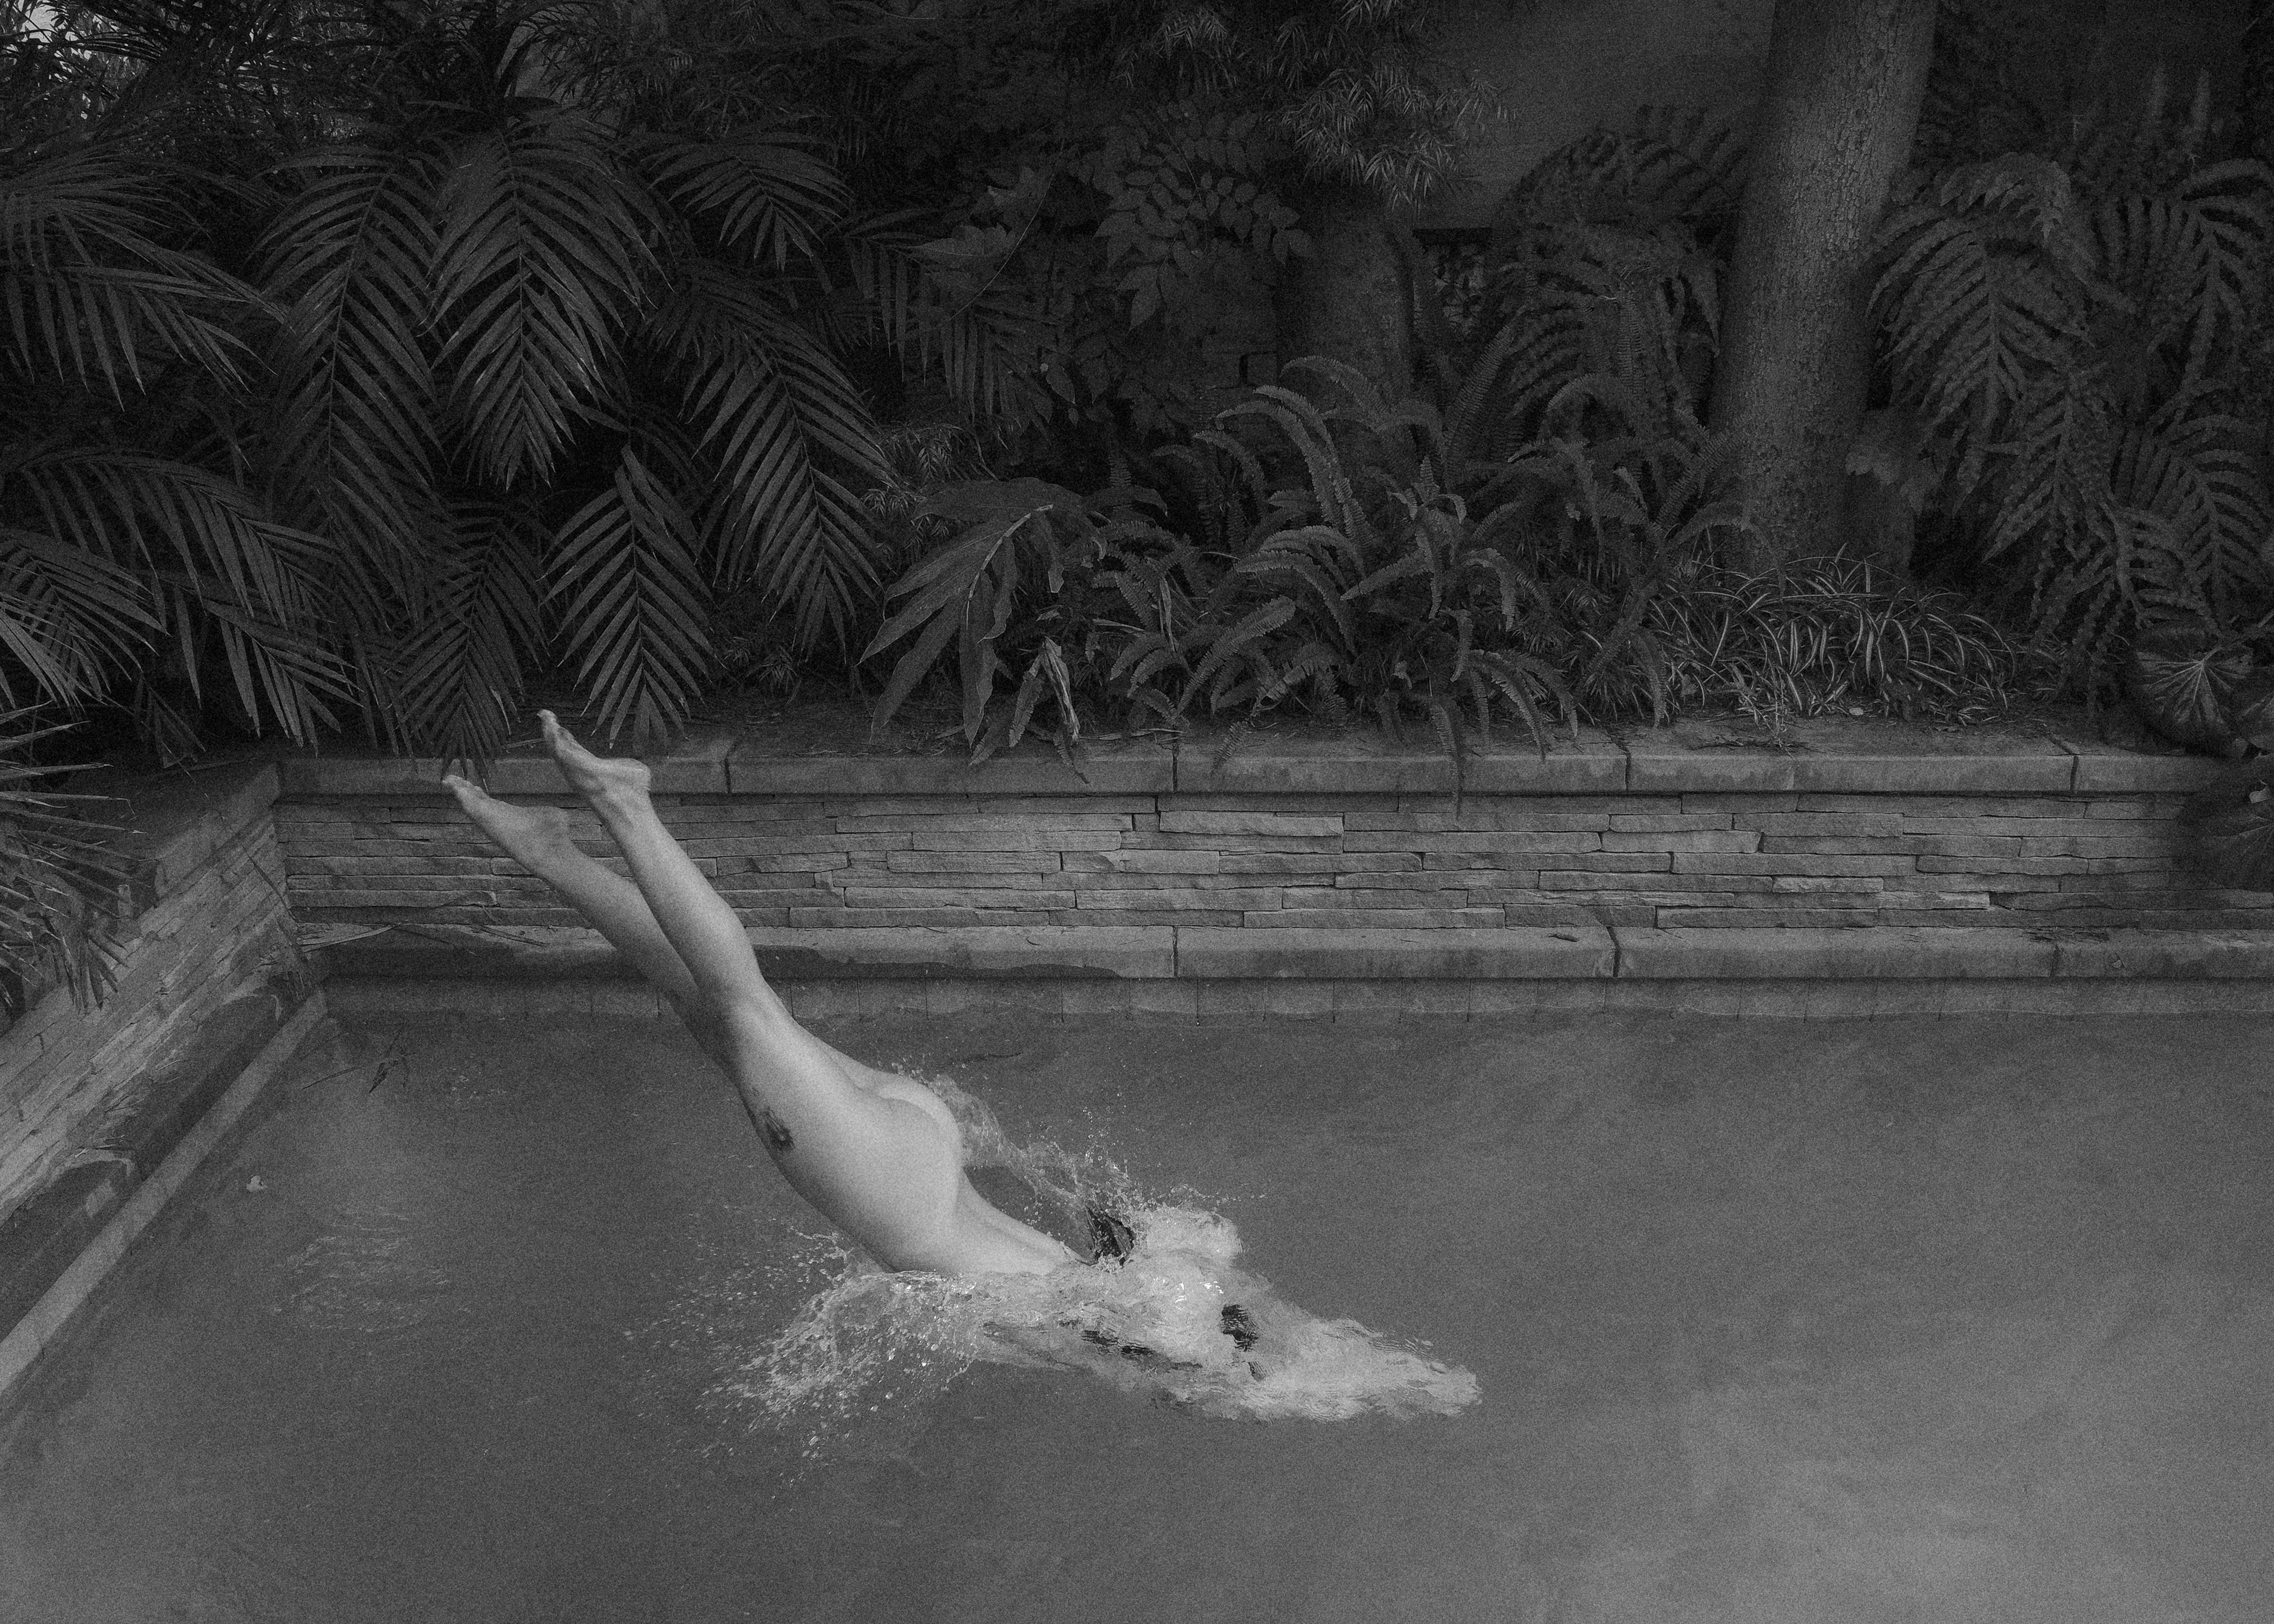 "Dive In" Photography 25" x 35" in Edition of 15 by Larsen Sotelo

Not framed. Ships in a tube

Comes with COA 

Available sizes:	
Edition of 15: 25" x 35"  inch	
Edition of 7: 30" x 42" inch	
Edition of 3: 40" x 56" inch	
AP: 2	

* * * ABOUT Larsen